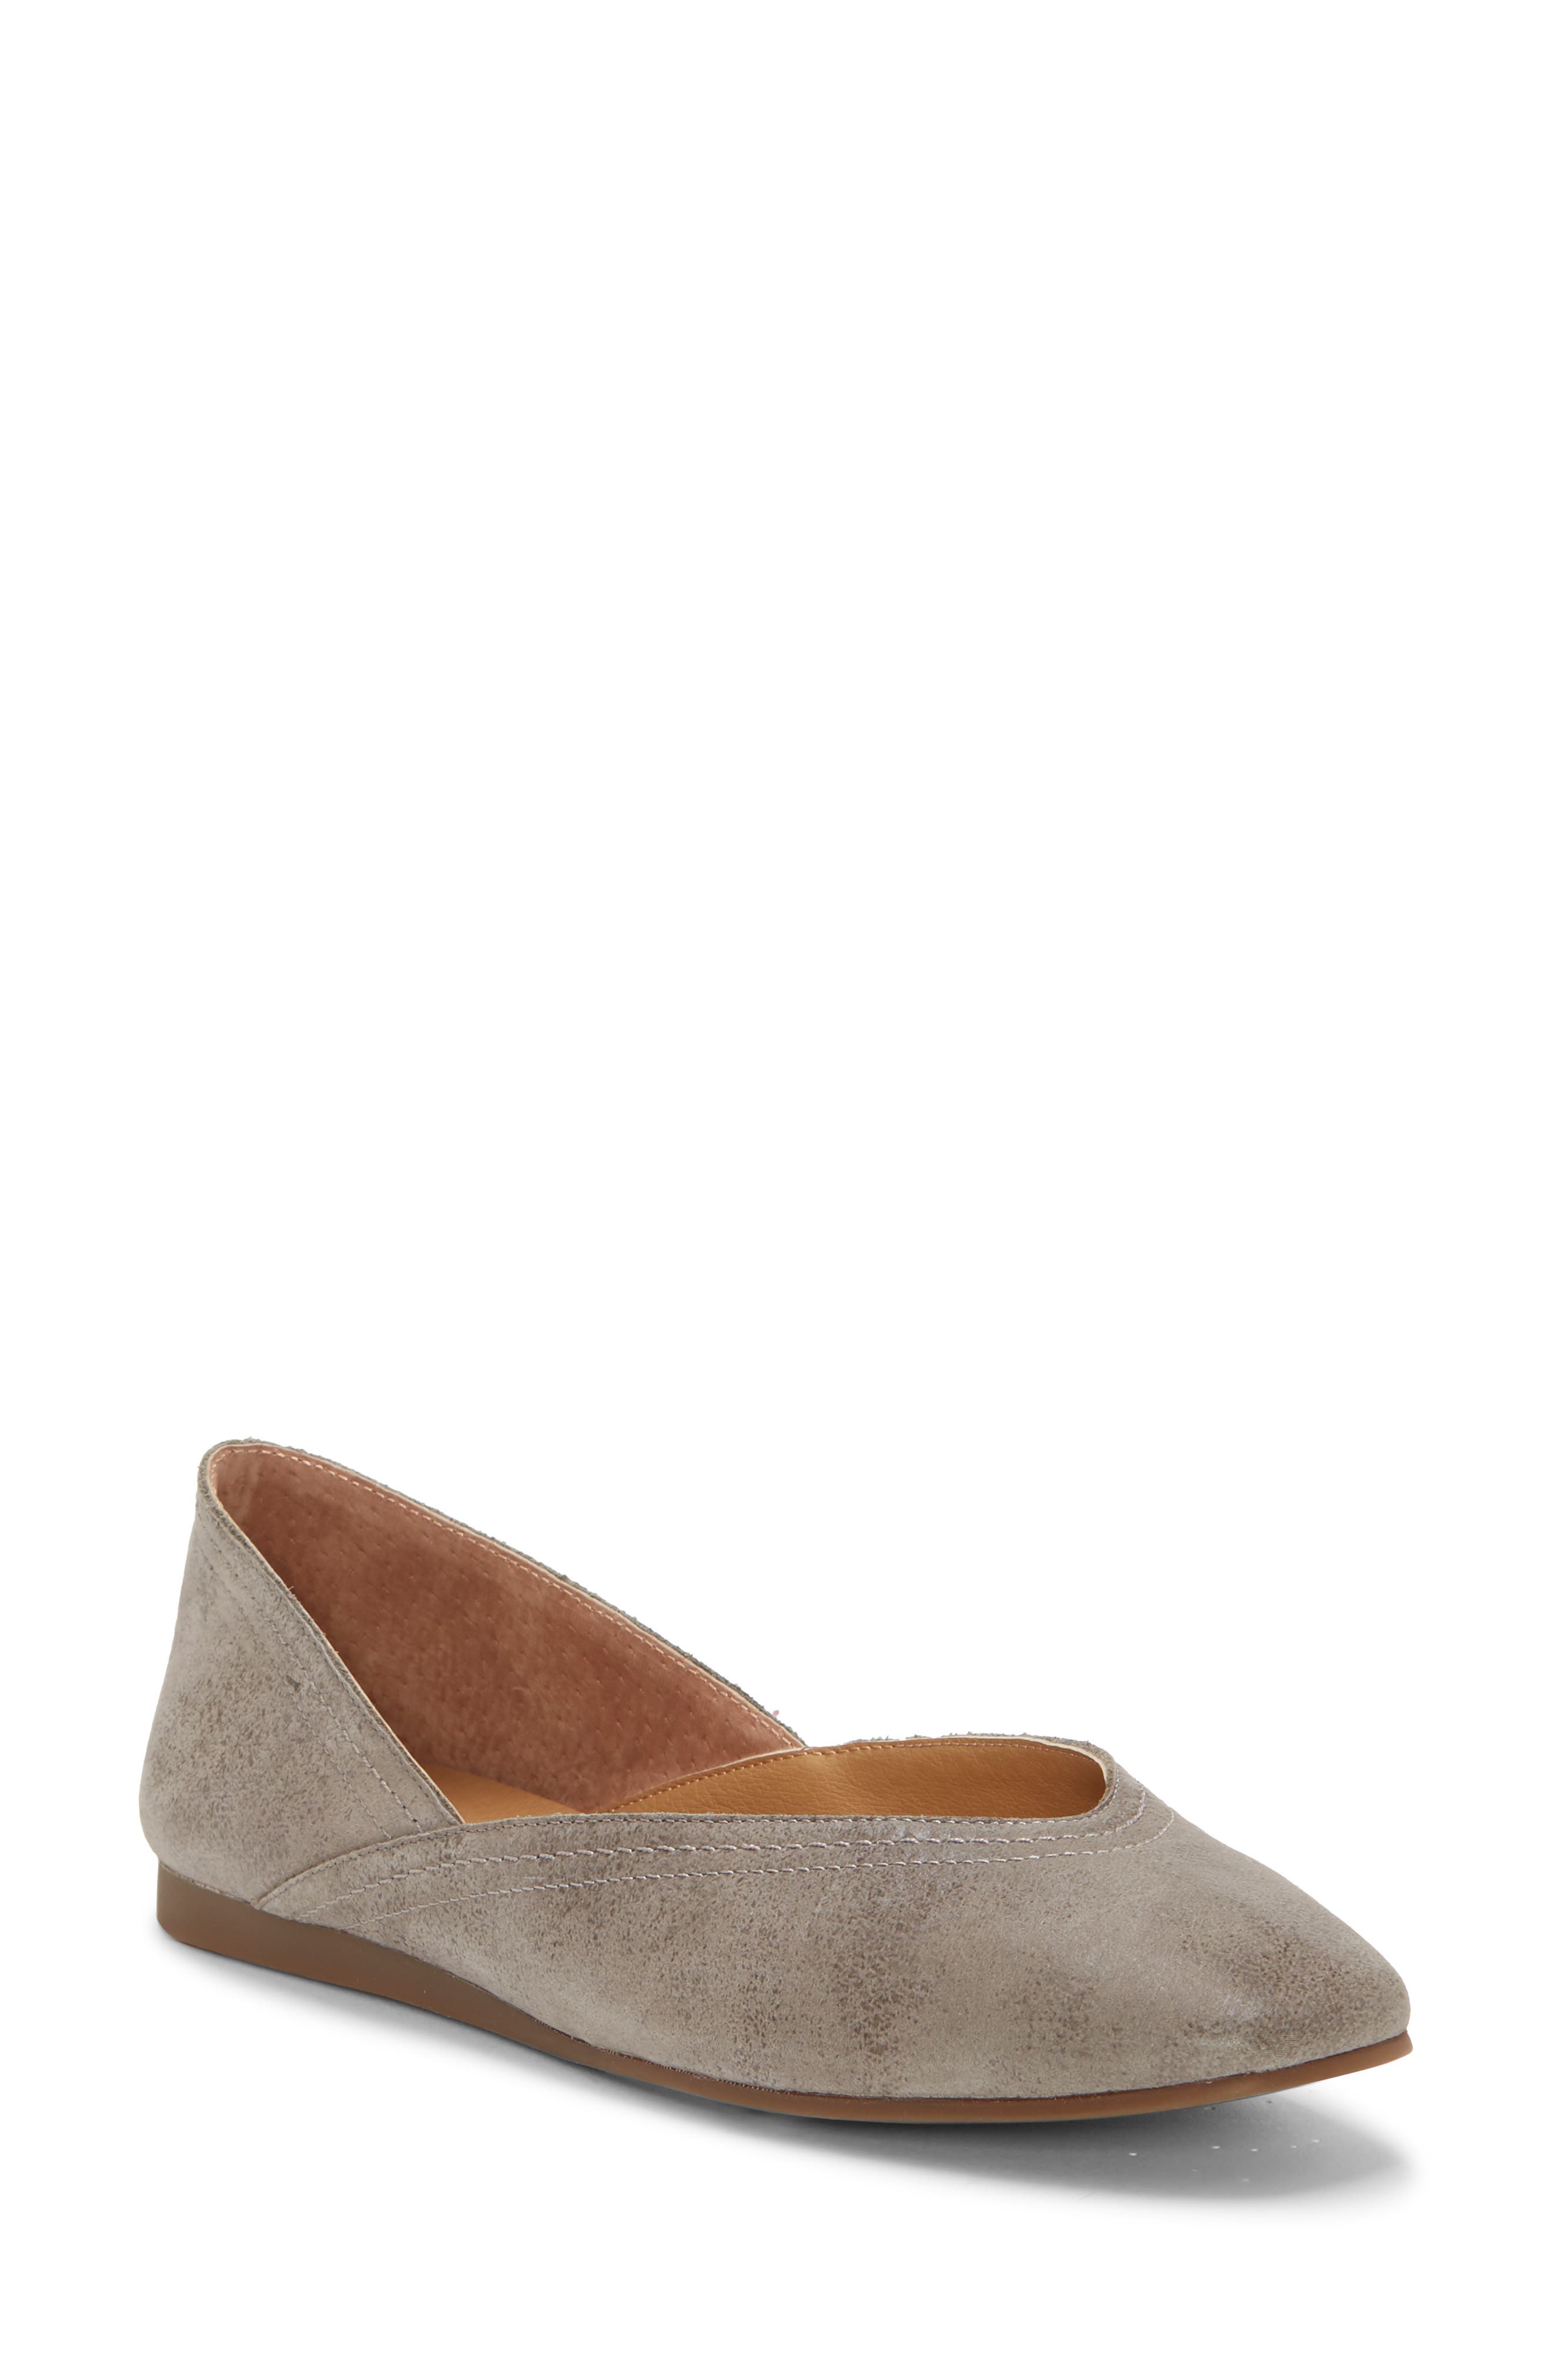 Women's Lucky Brand Shoes | Nordstrom